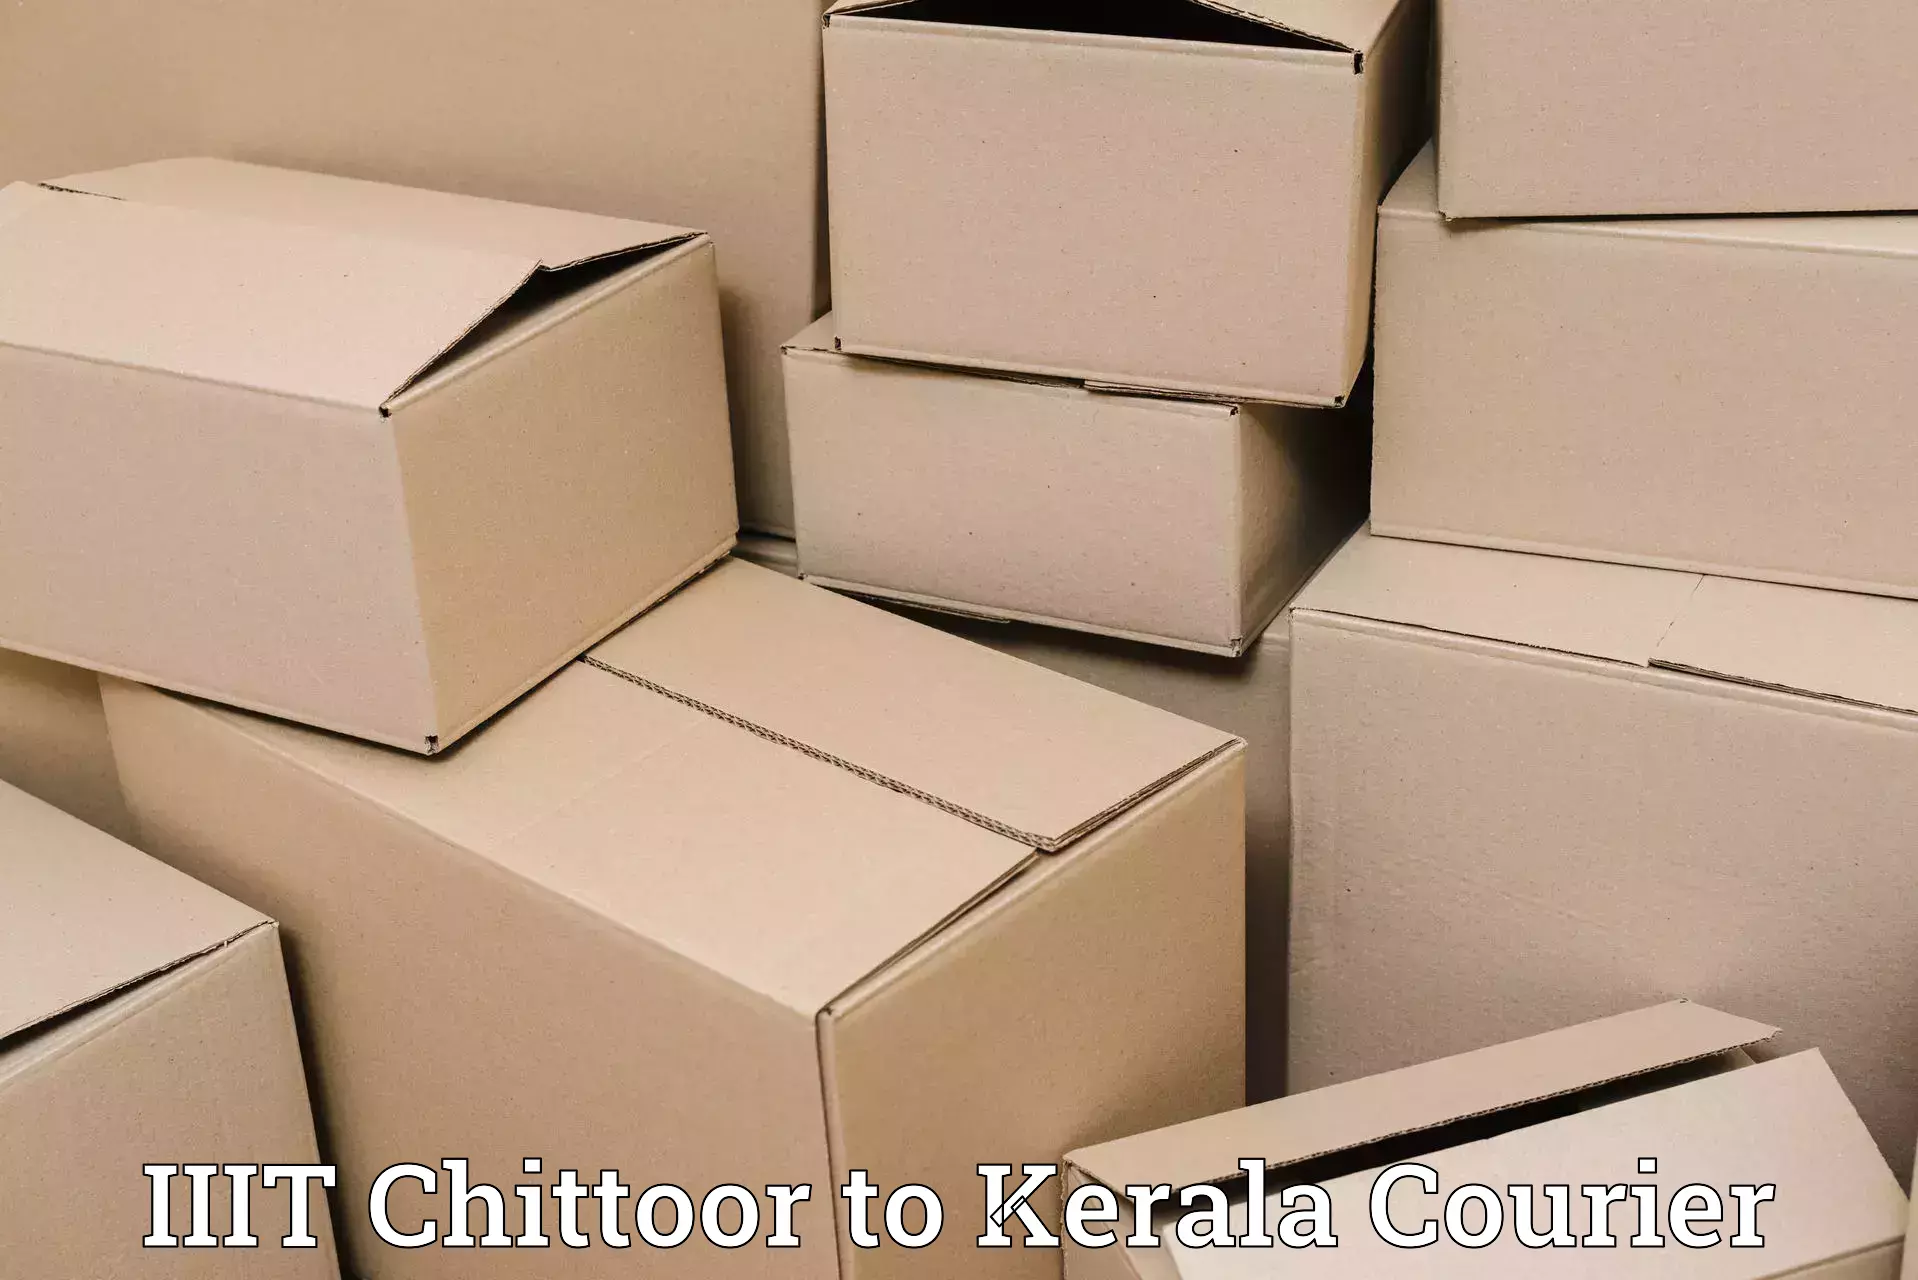 Parcel service for businesses IIIT Chittoor to Pathanamthitta